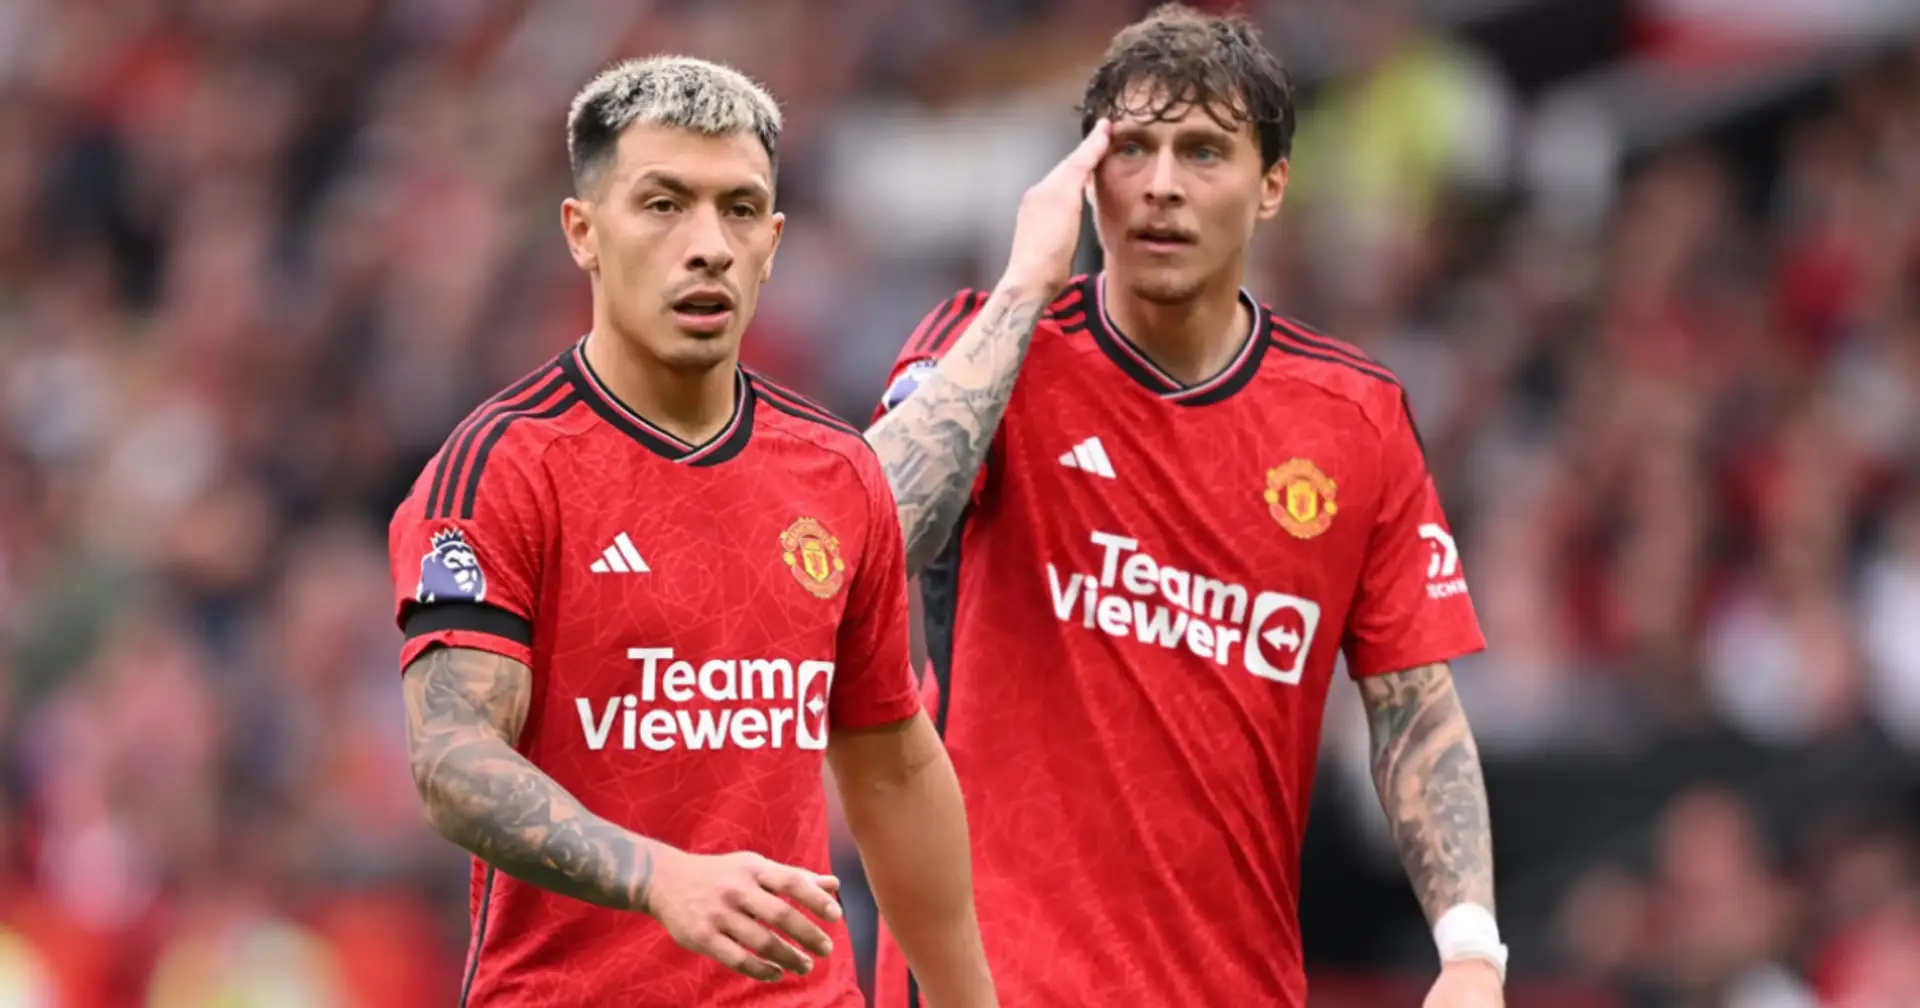 Martinez and Lindelof injured: Who should start vs Chelsea and why?